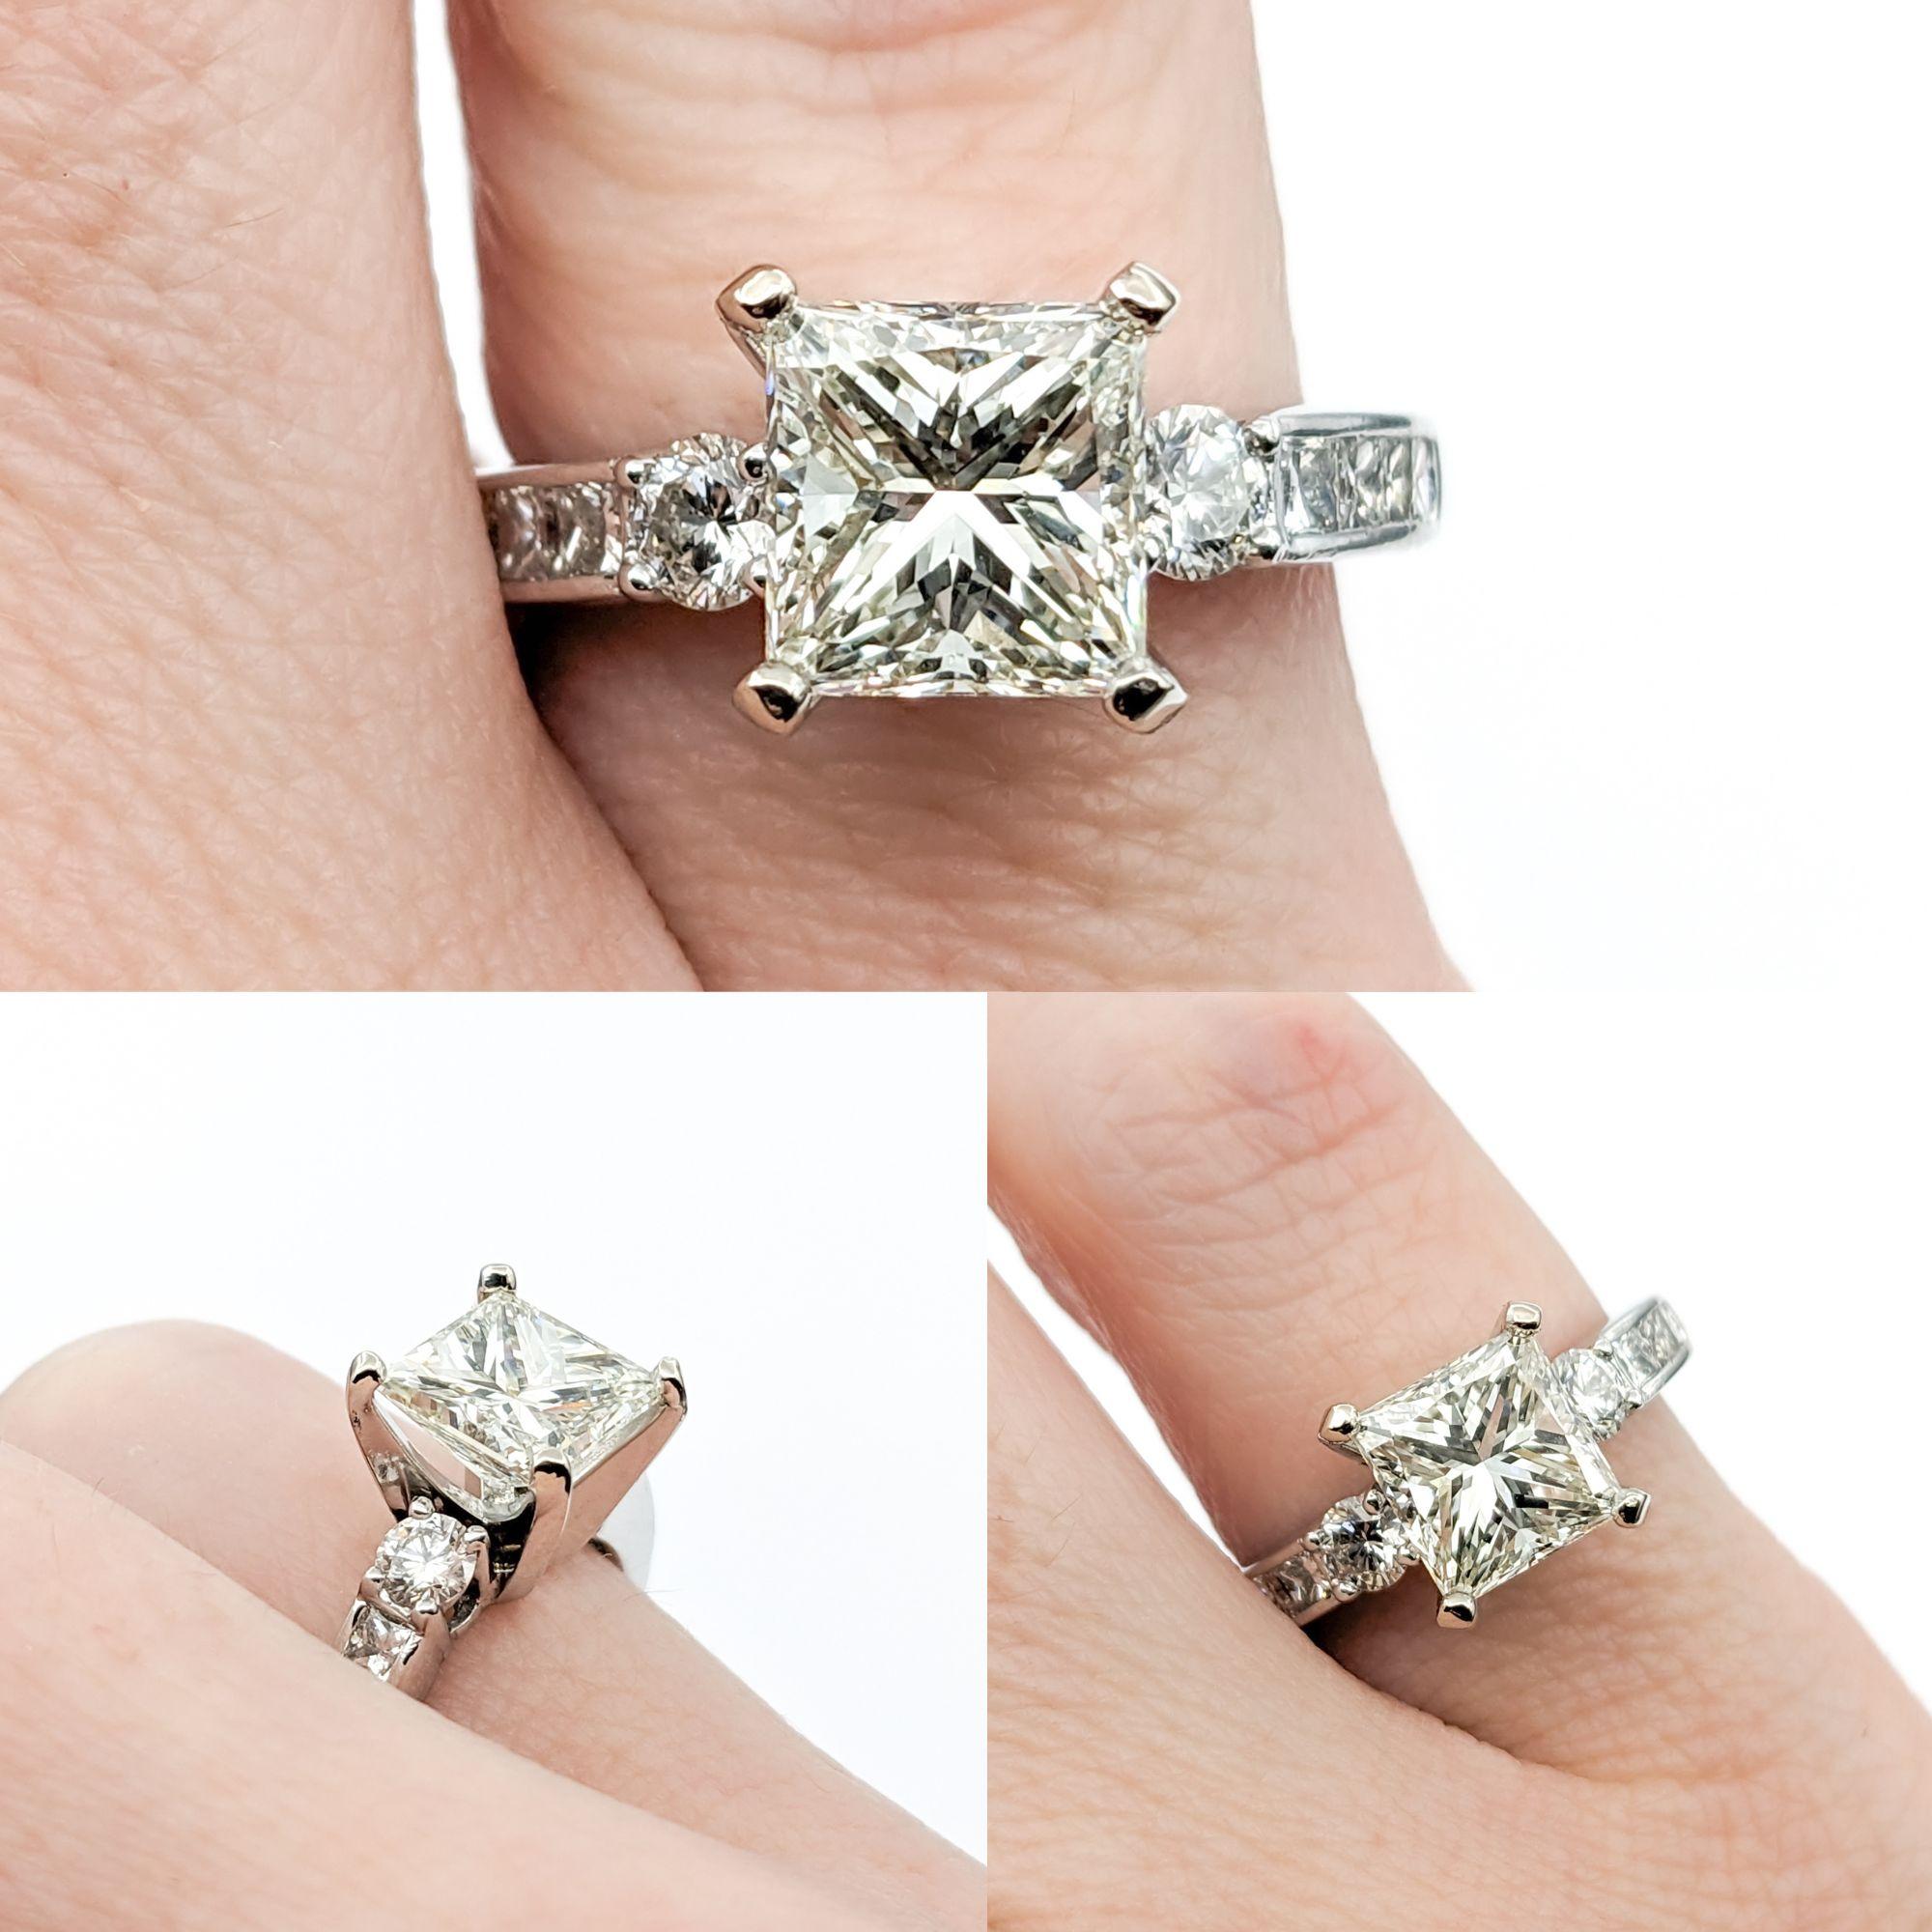 1.67ct Diamond Engagement Ring In White Gold

This exquisite Diamond Engagement Ring, exquisitely crafted in 14kt white gold, showcases a breathtaking 1.67ct diamond that illuminates with its SI1 clarity and J color, casting a spell of elegance. The